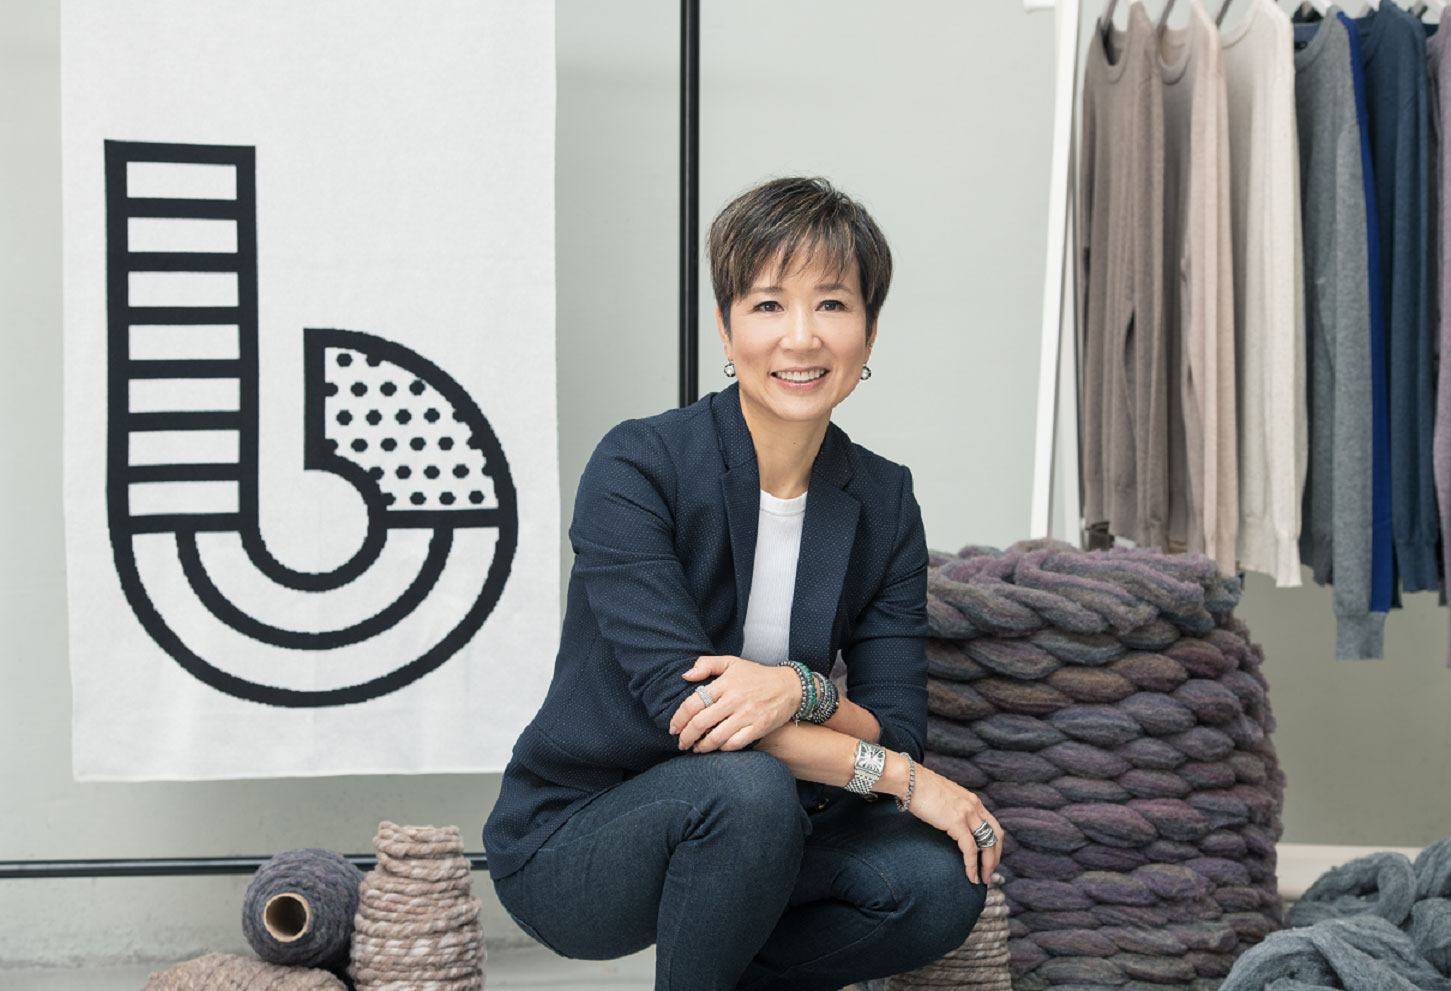 Textile recycling pioneers weave their magic • Recycling International